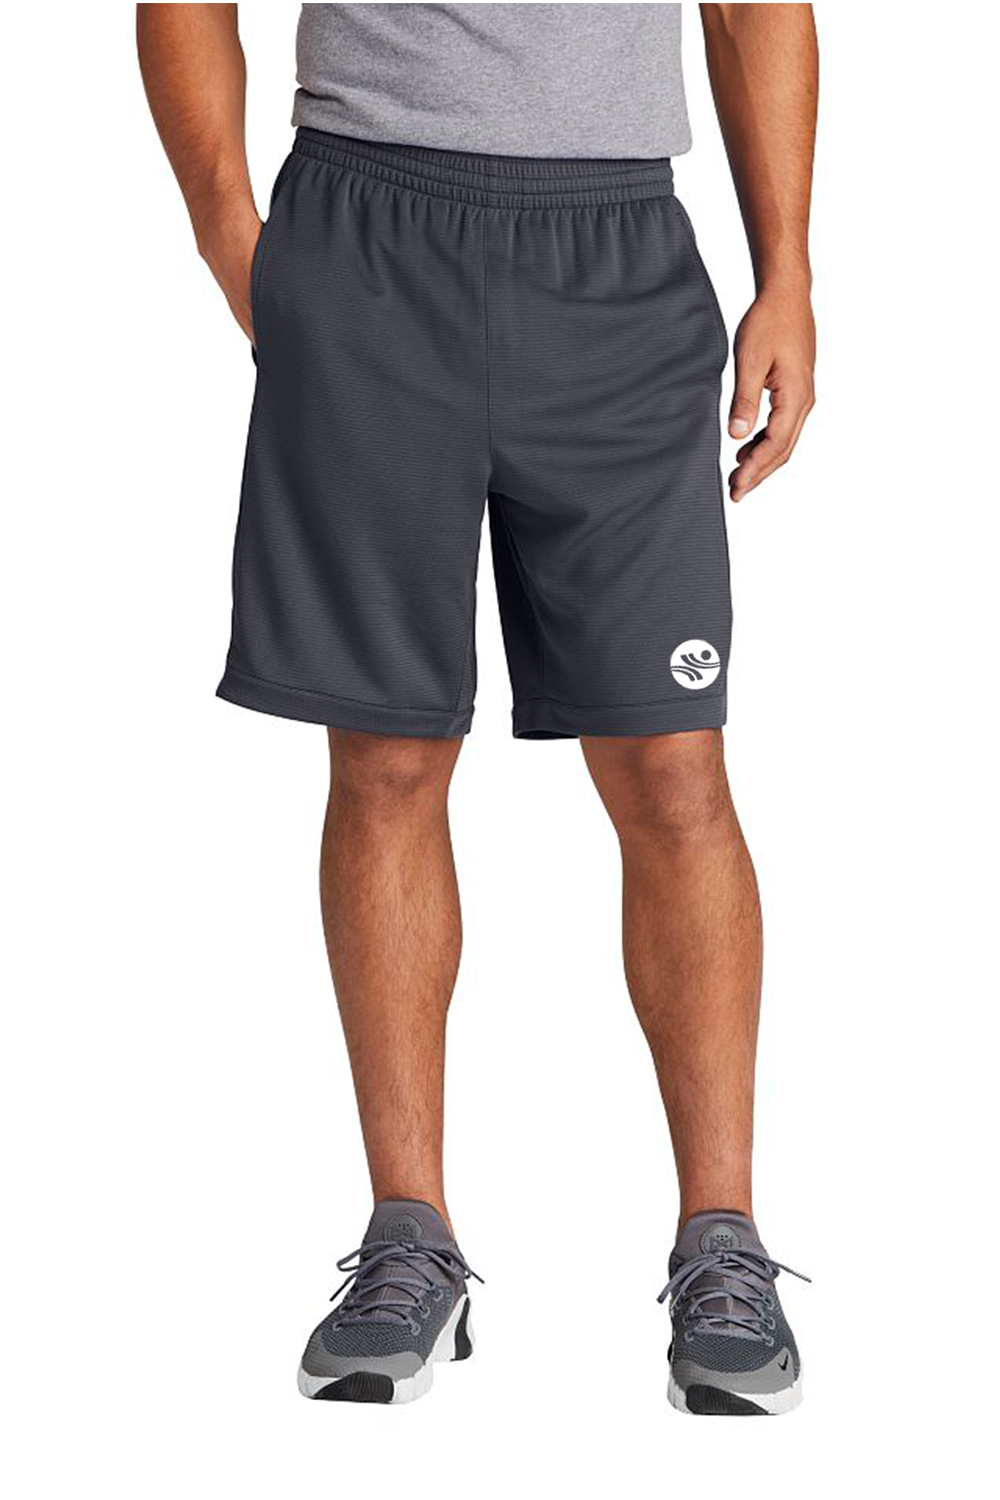 Men's Position Short with Pockets